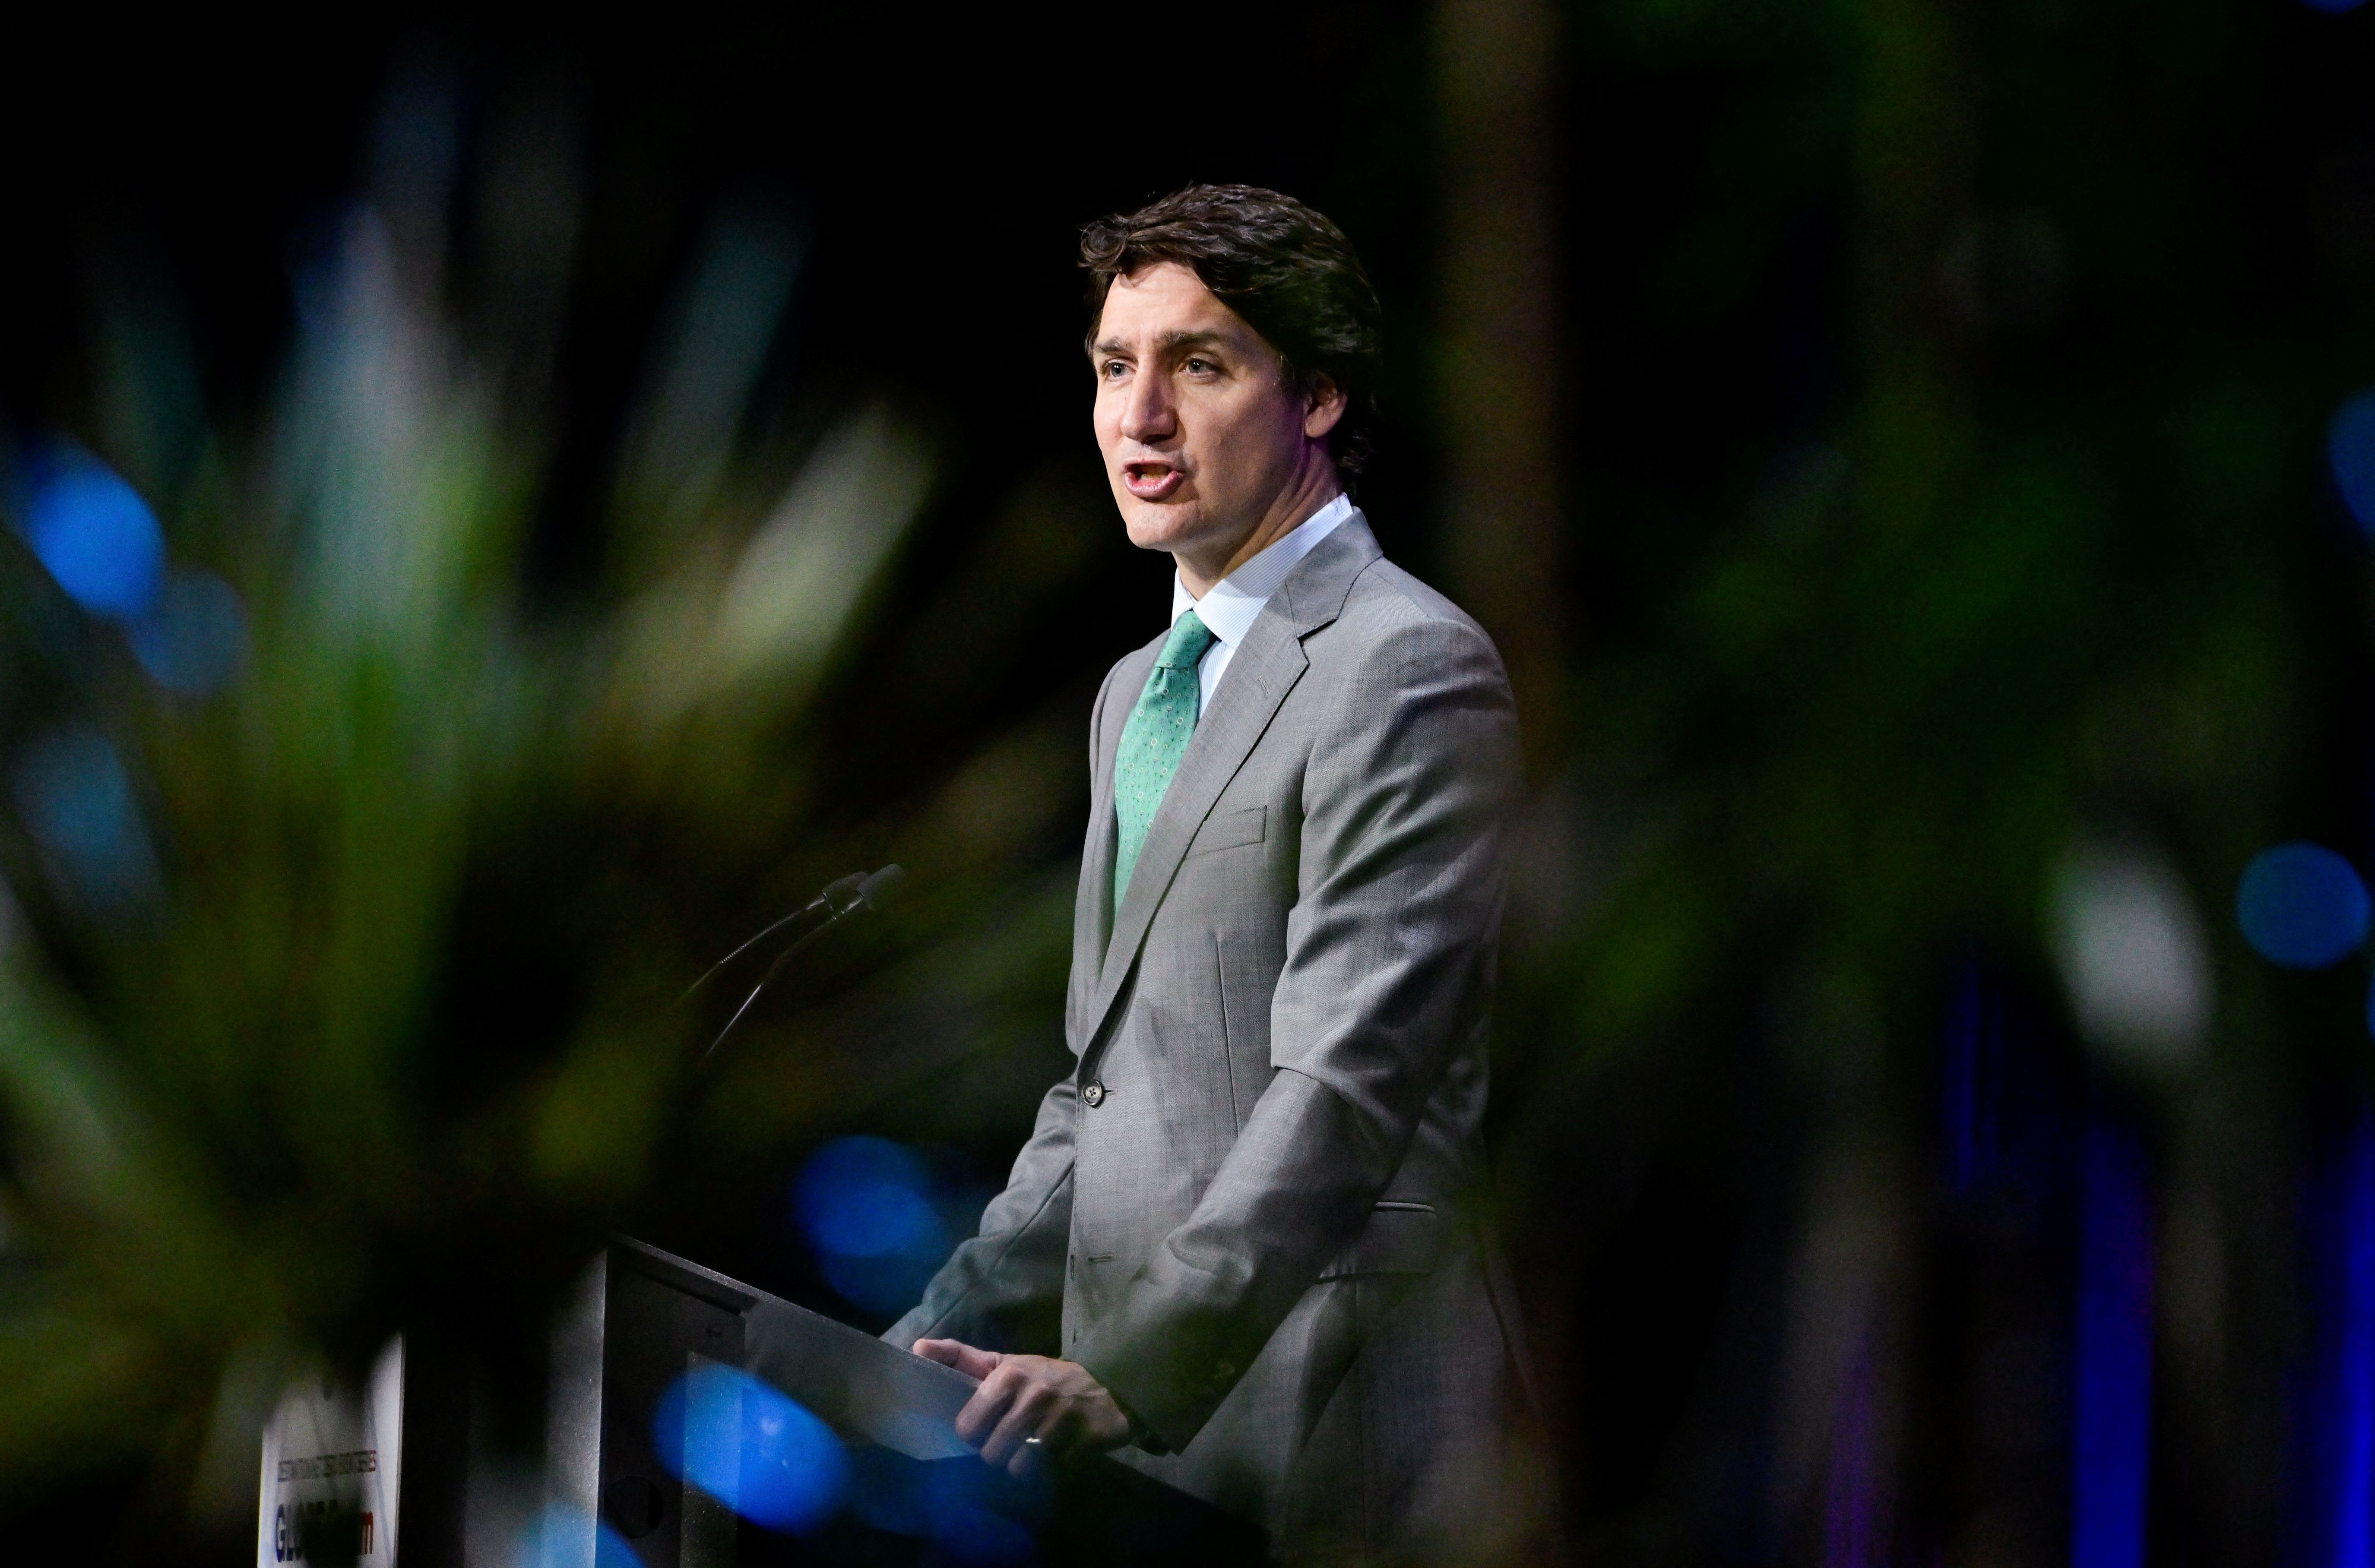 Canada's Prime Minister Trudeau makes a climate speech in Vancouver